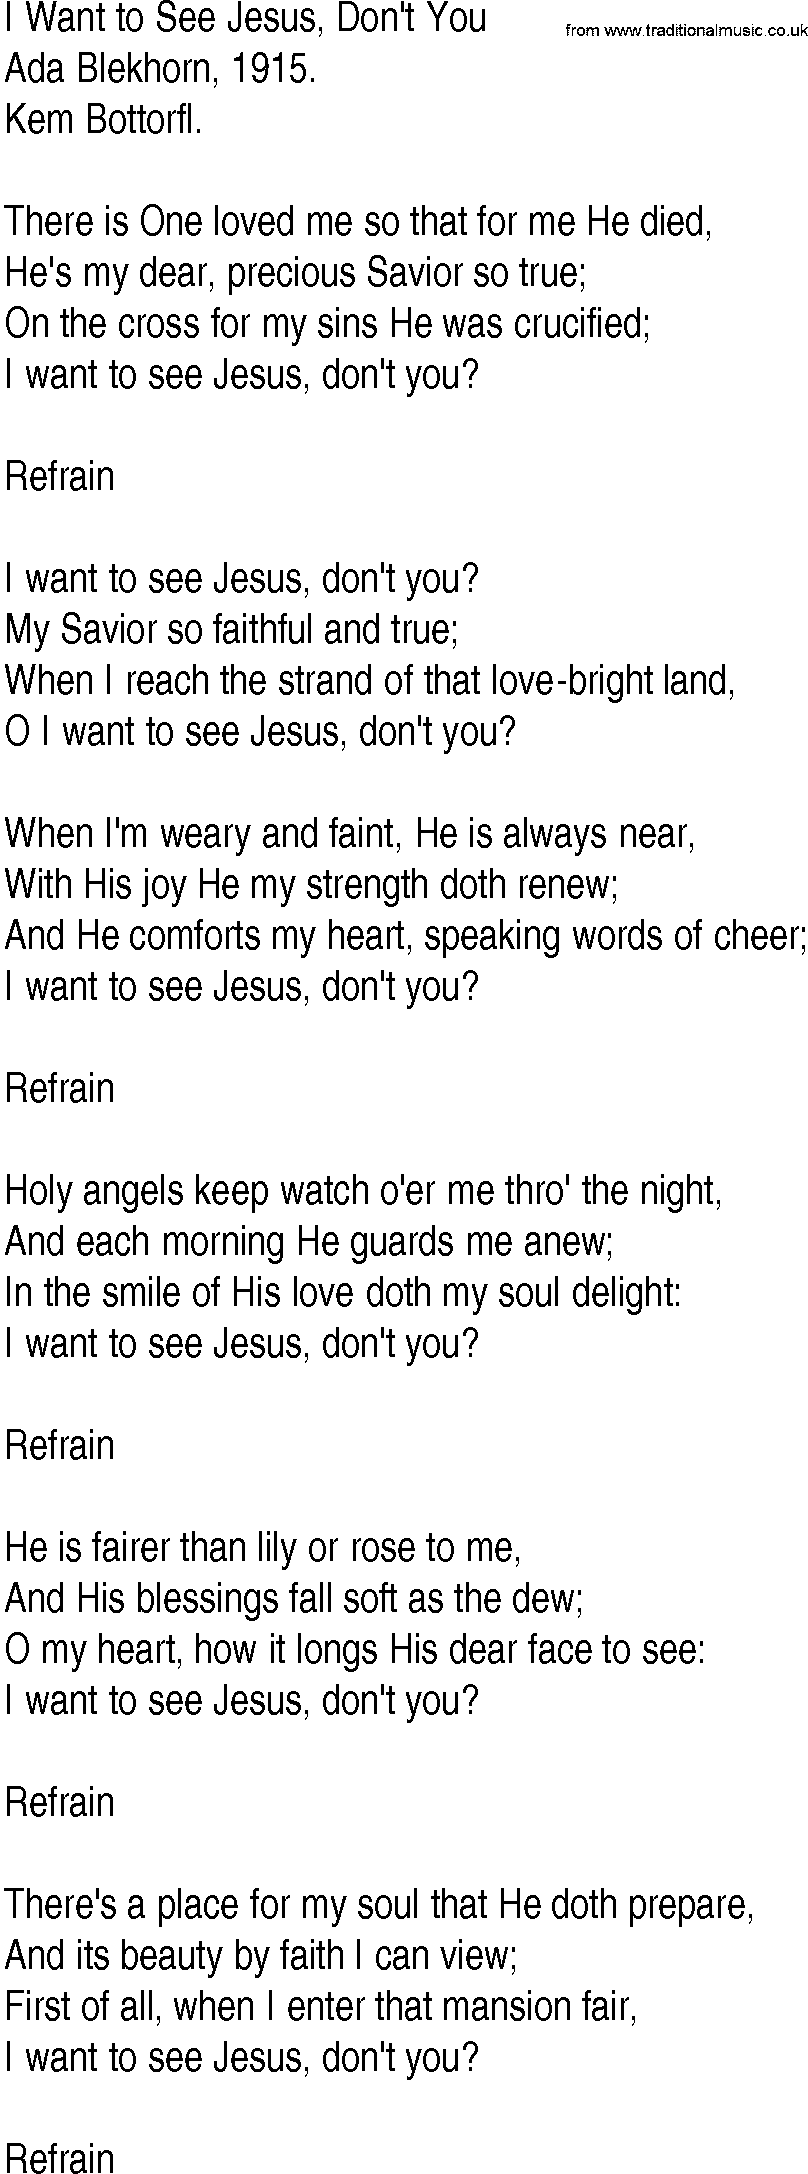 Hymn and Gospel Song: I Want to See Jesus, Don't You by Ada Blekhorn lyrics